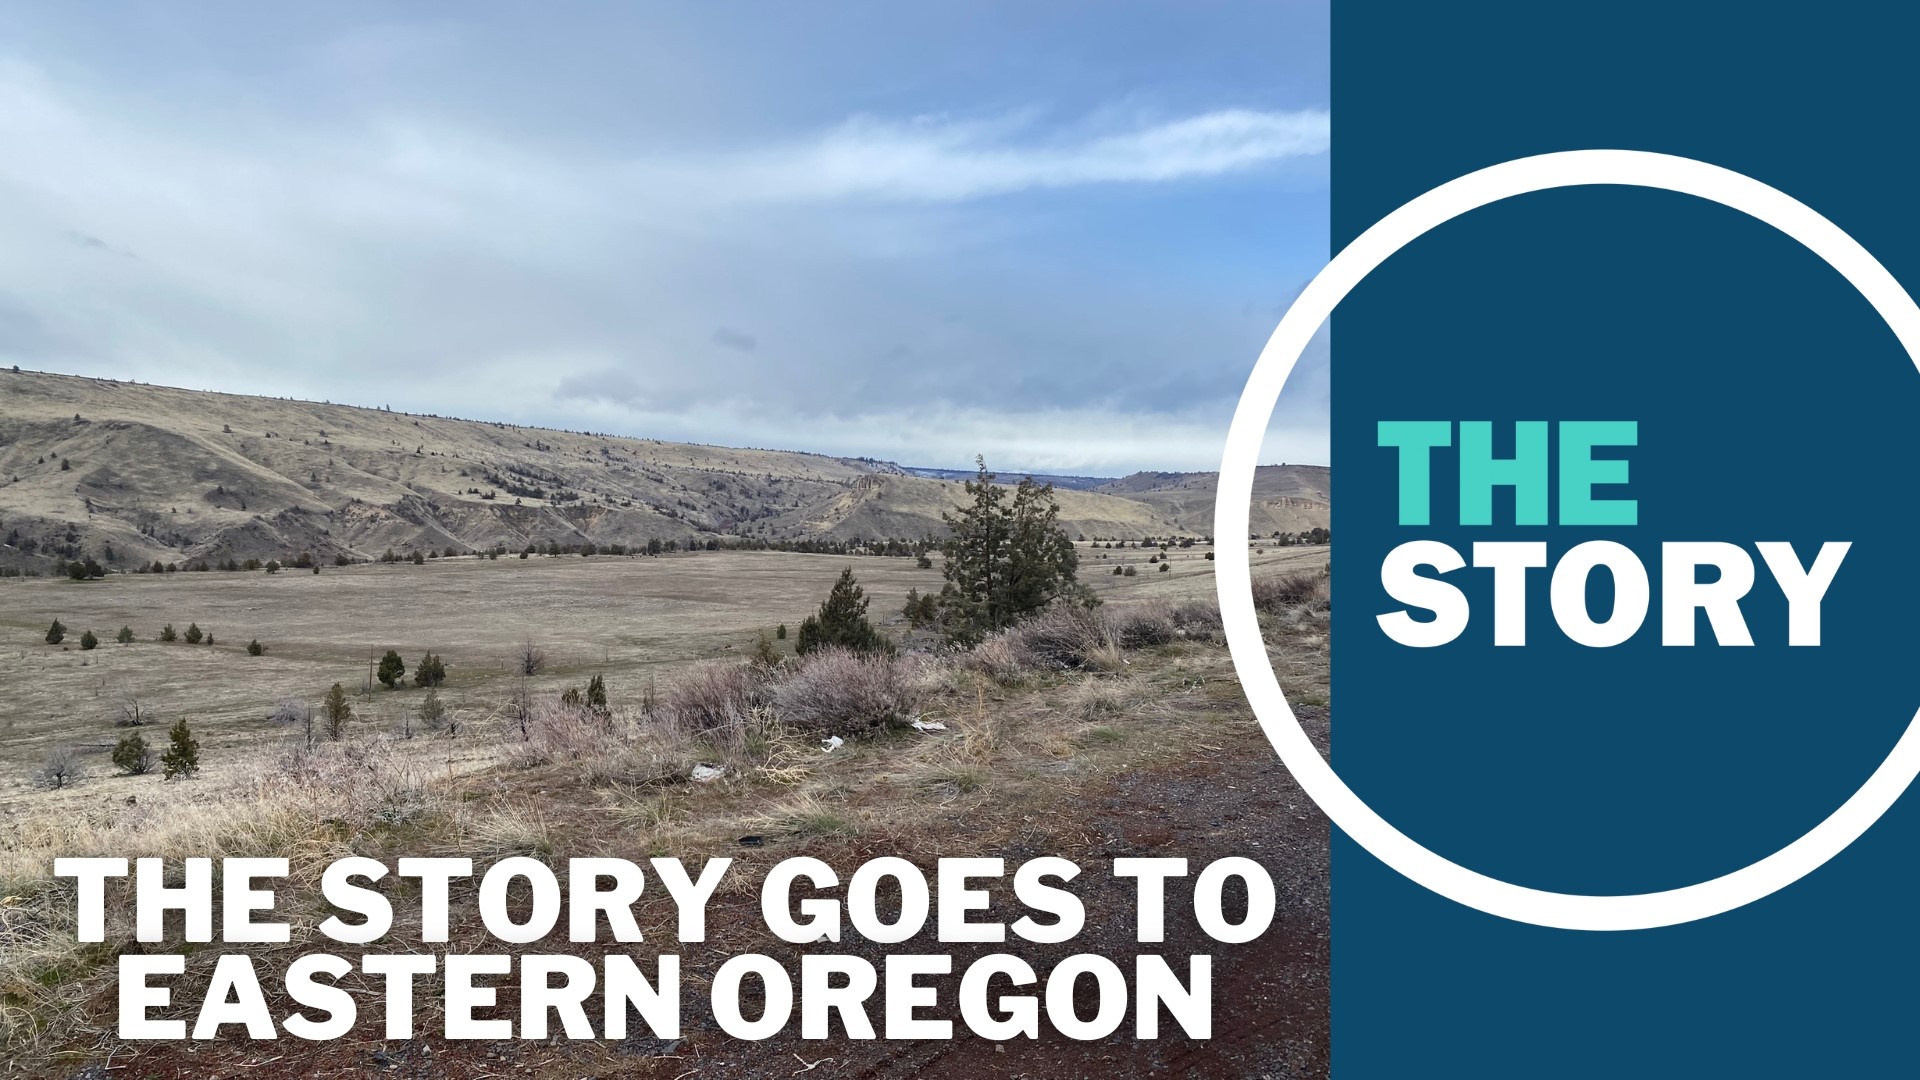 The "Greater Idaho" movement has been gaining steam throughout eastern Oregon. The Story's Pat Dooris headed out east to ask residents why they want to leave.